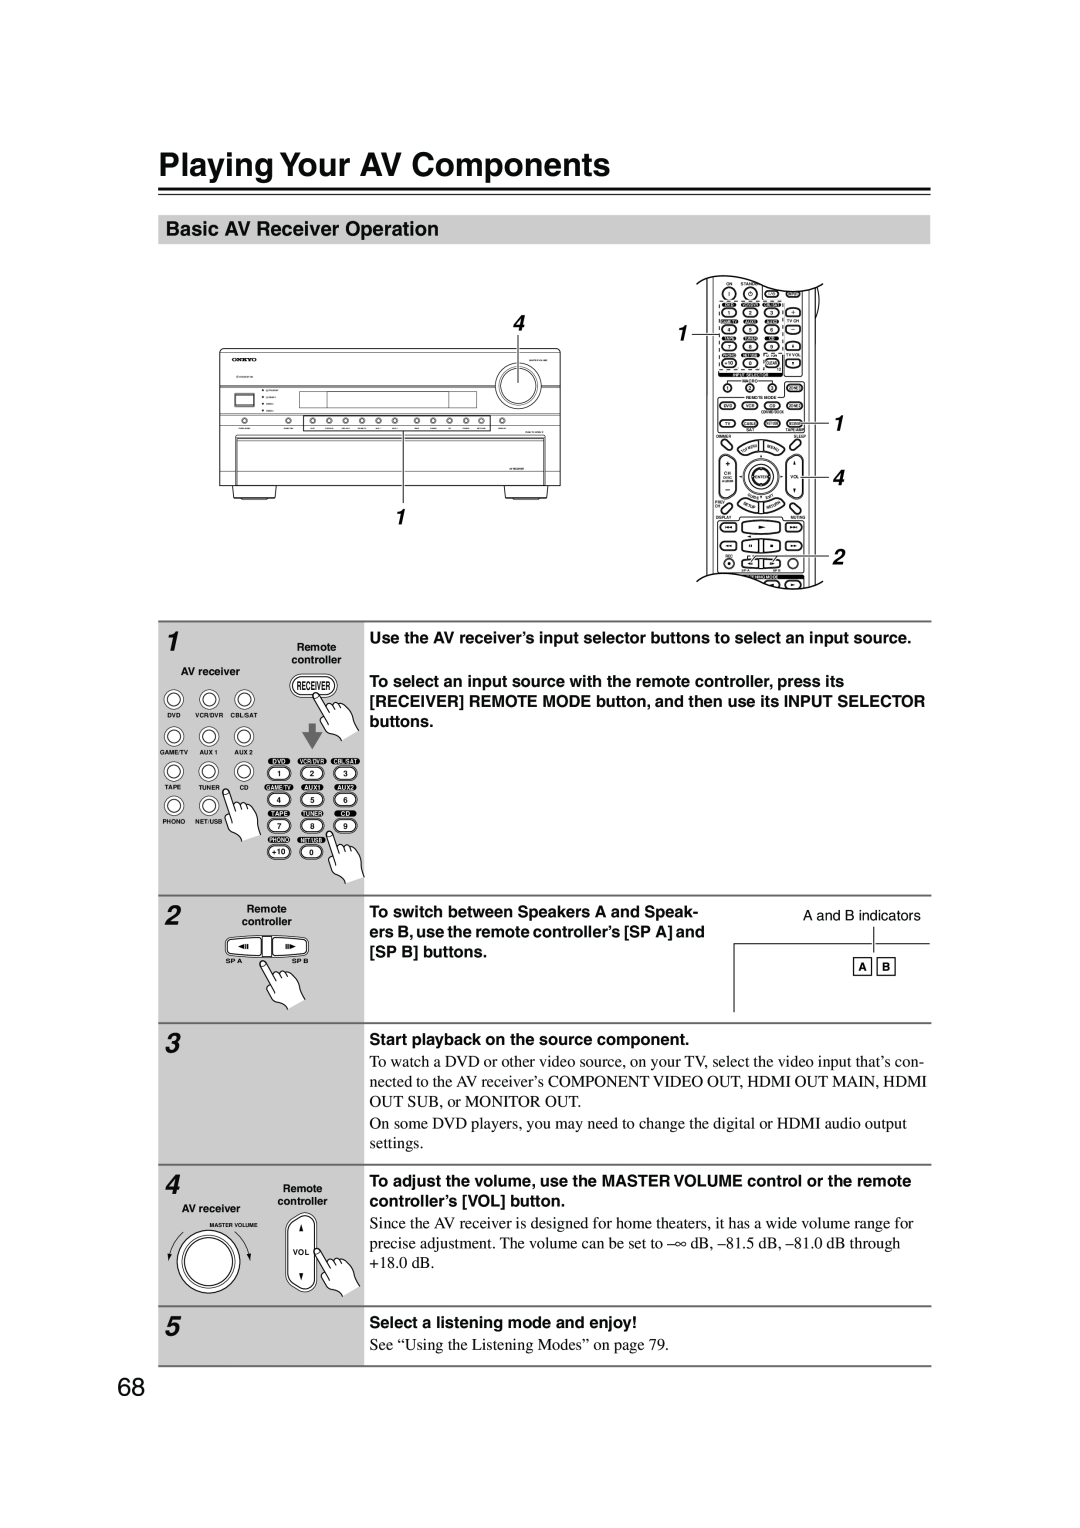 Onkyo TX-NR905 Playing Your AV Components, 1 4 2, Basic AV Receiver Operation, See “Using the Listening Modes” on page 